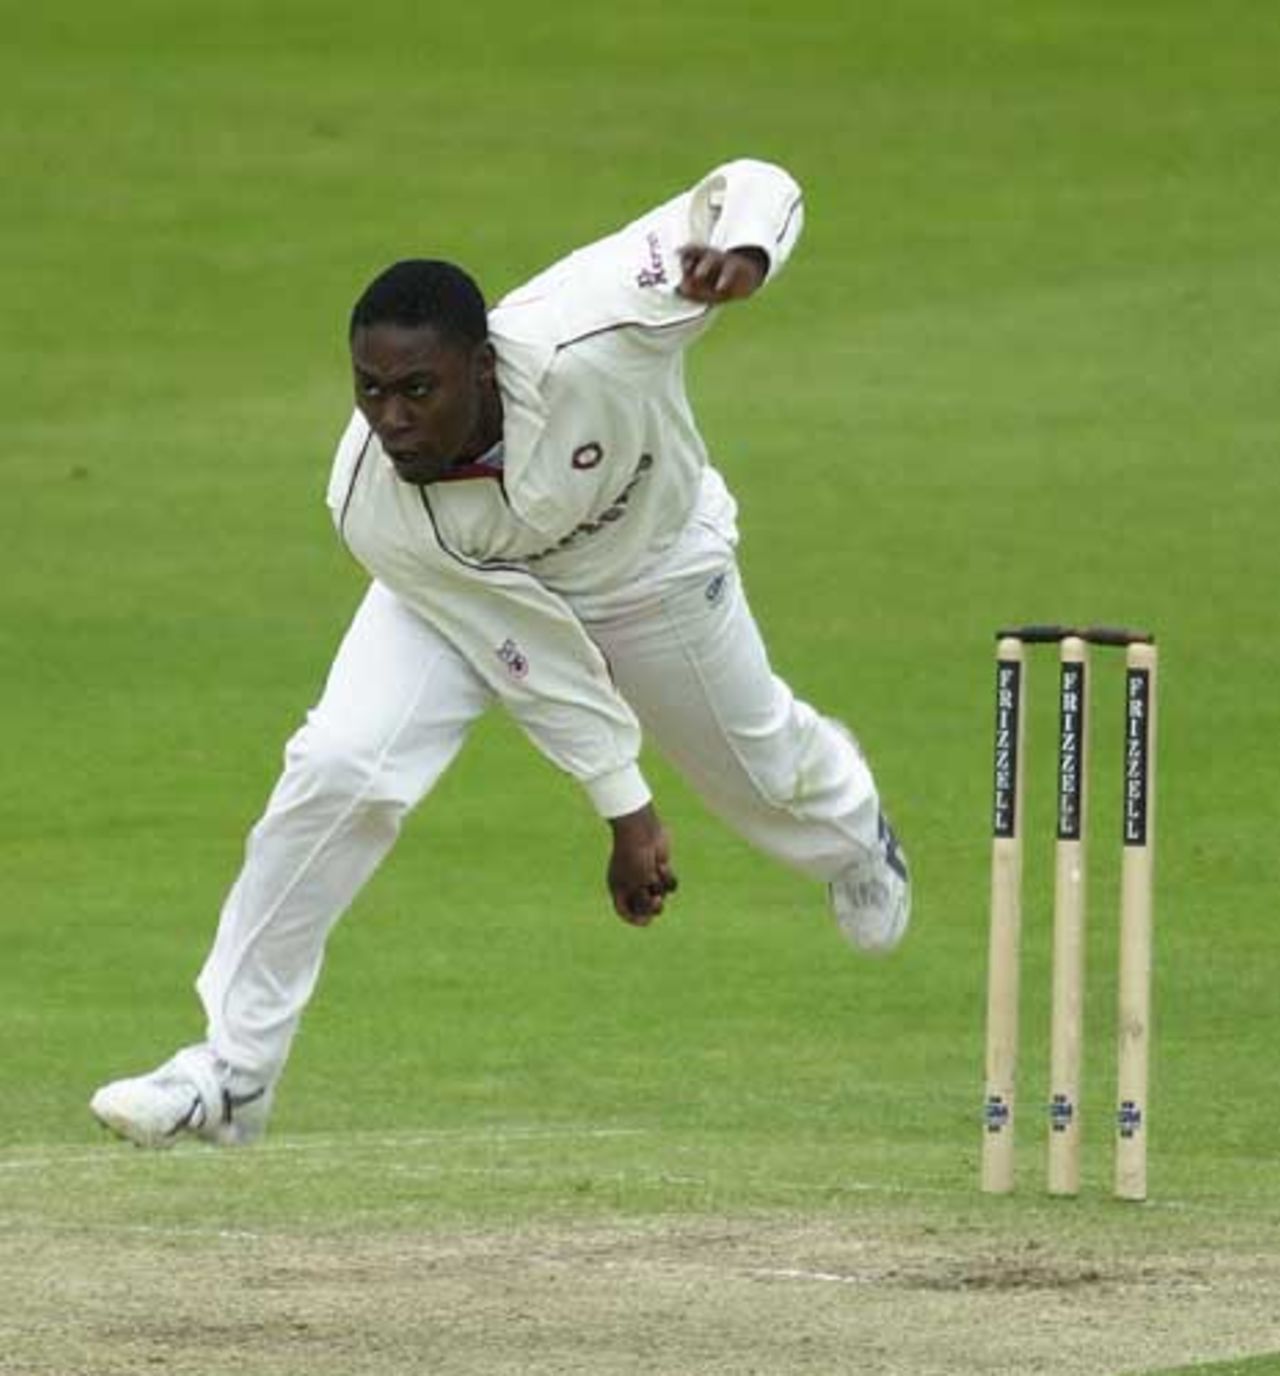 Flying Ricky Anderson at Trent Bridge, Frizzell County Championship, Trent Bridge, 25 May 2002